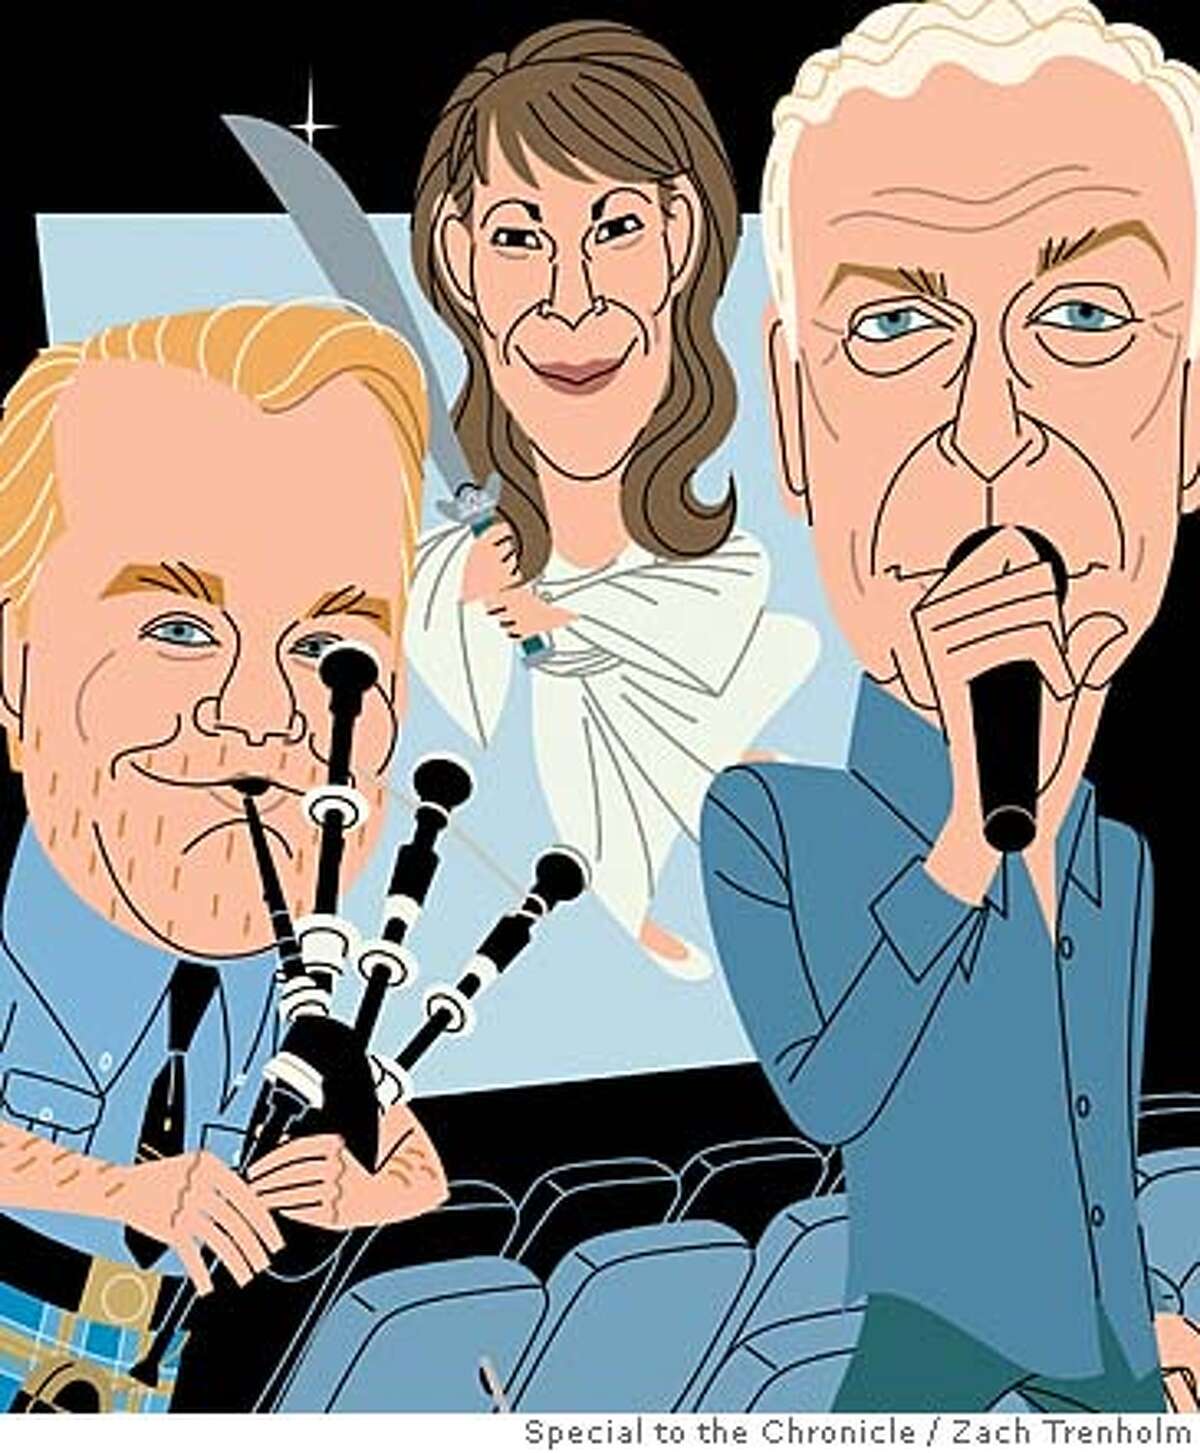 Caricatures of character actors (from left): Philip Seymour Hoffman, Lili Taylor and Michael Caine. Illustration by Zach Trenholm, special to the Chronicle